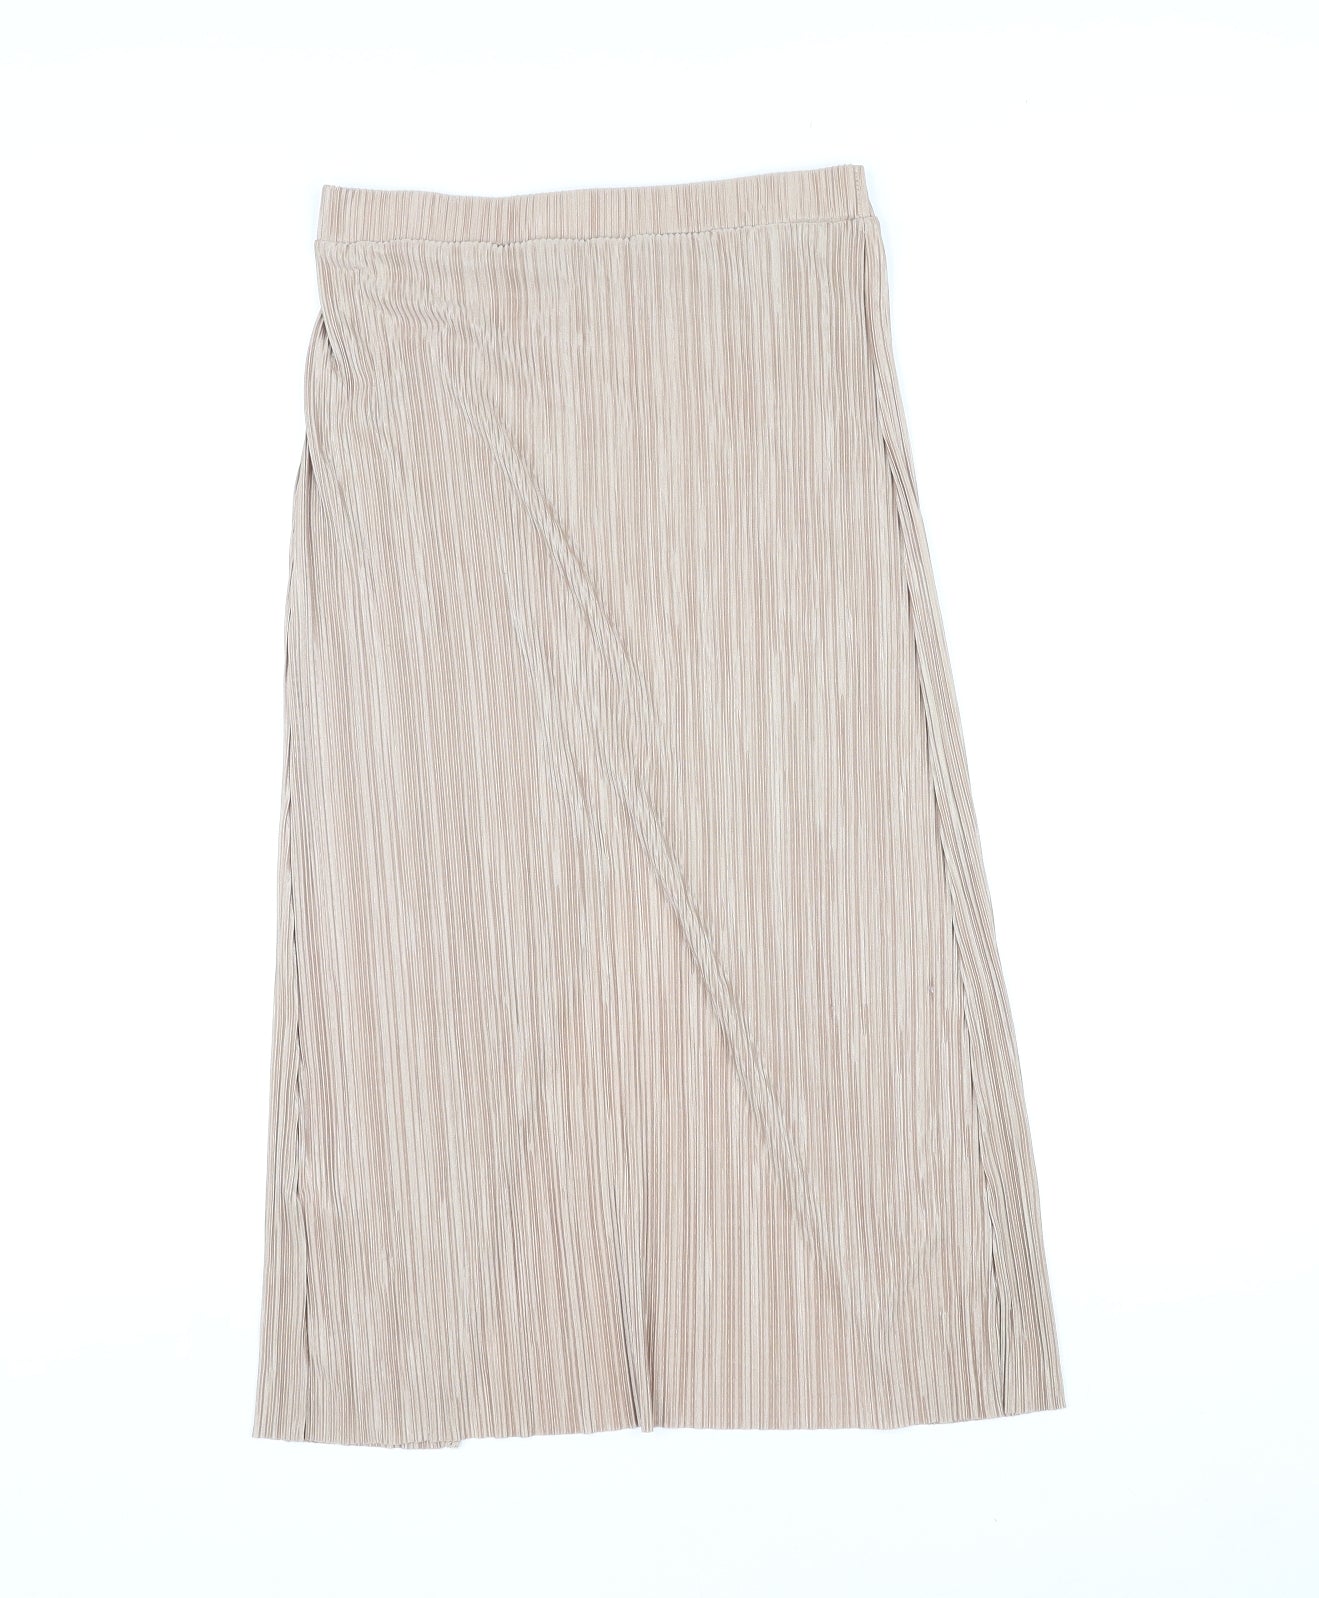 Topshop Womens Beige Polyester Pleated Skirt Size 8